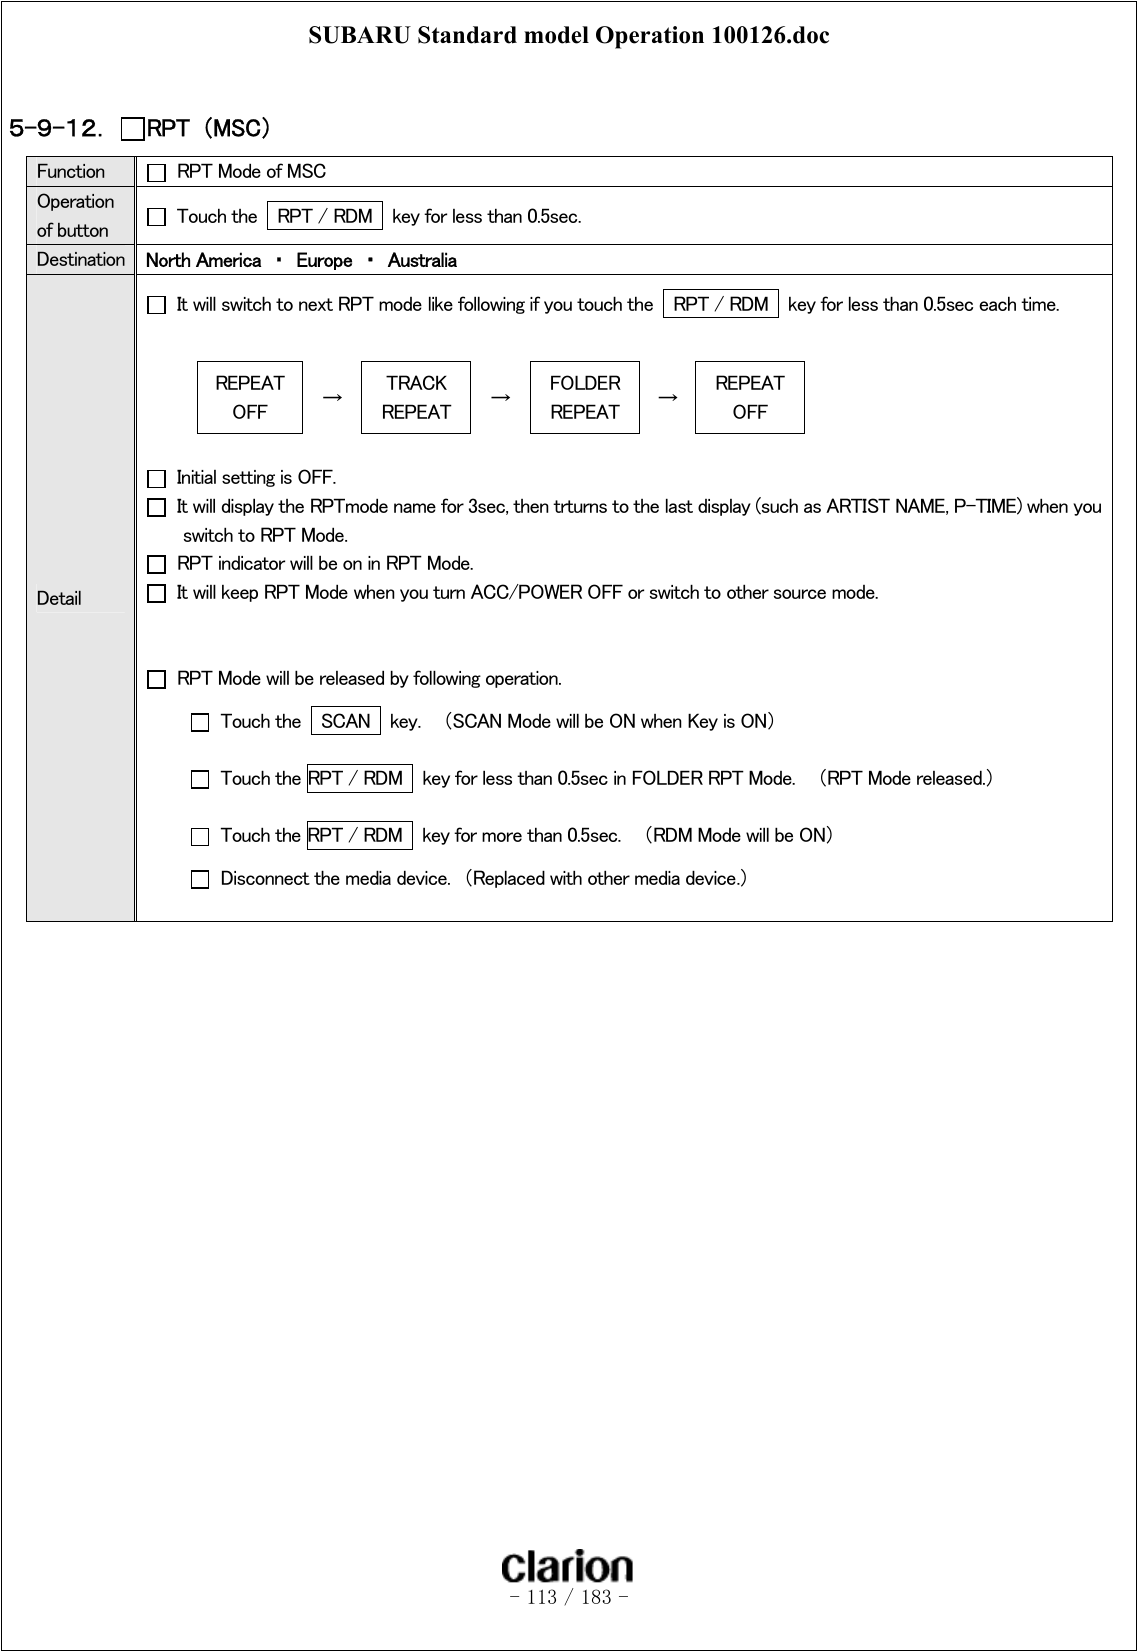 SUBARU Standard model Operation 100126.doc   - 113 / 183 -   ５-９-１２．  RPT  （MSC） Function    RPT Mode of MSC Operation of button    Touch the    RPT / RDM    key for less than 0.5sec. Destination  North America  ・  Europe  ・  Australia Detail   It will switch to next RPT mode like following if you touch the    RPT / RDM    key for less than 0.5sec each time.  REPEAT OFF  →  TRACK REPEAT  →  FOLDER REPEAT  →  REPEAT OFF    Initial setting is OFF.   It will display the RPTmode name for 3sec, then trturns to the last display (such as ARTIST NAME, P-TIME) when you switch to RPT Mode.   RPT indicator will be on in RPT Mode.   It will keep RPT Mode when you turn ACC/POWER OFF or switch to other source mode.     RPT Mode will be released by following operation.   Touch the    SCAN    key.    （SCAN Mode will be ON when Key is ON）   Touch the RPT / RDM   key for less than 0.5sec in FOLDER RPT Mode.    （RPT Mode released.）   Touch the RPT / RDM    key for more than 0.5sec.    （RDM Mode will be ON）   Disconnect the media device.  （Replaced with other media device.）  